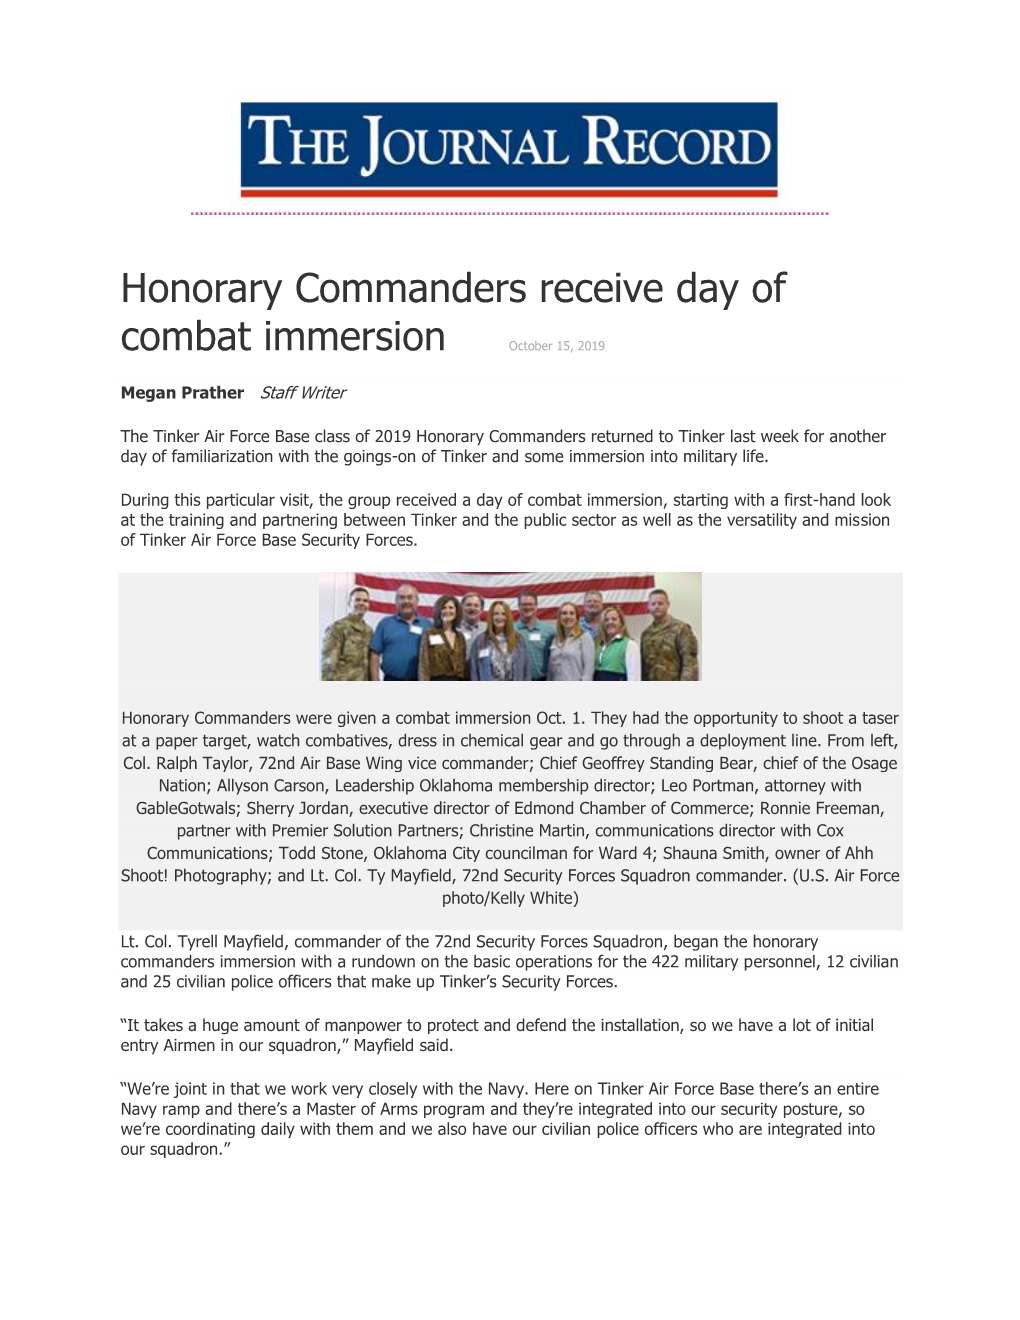 The Journal Record – Honorary Commanders Receive Day Of